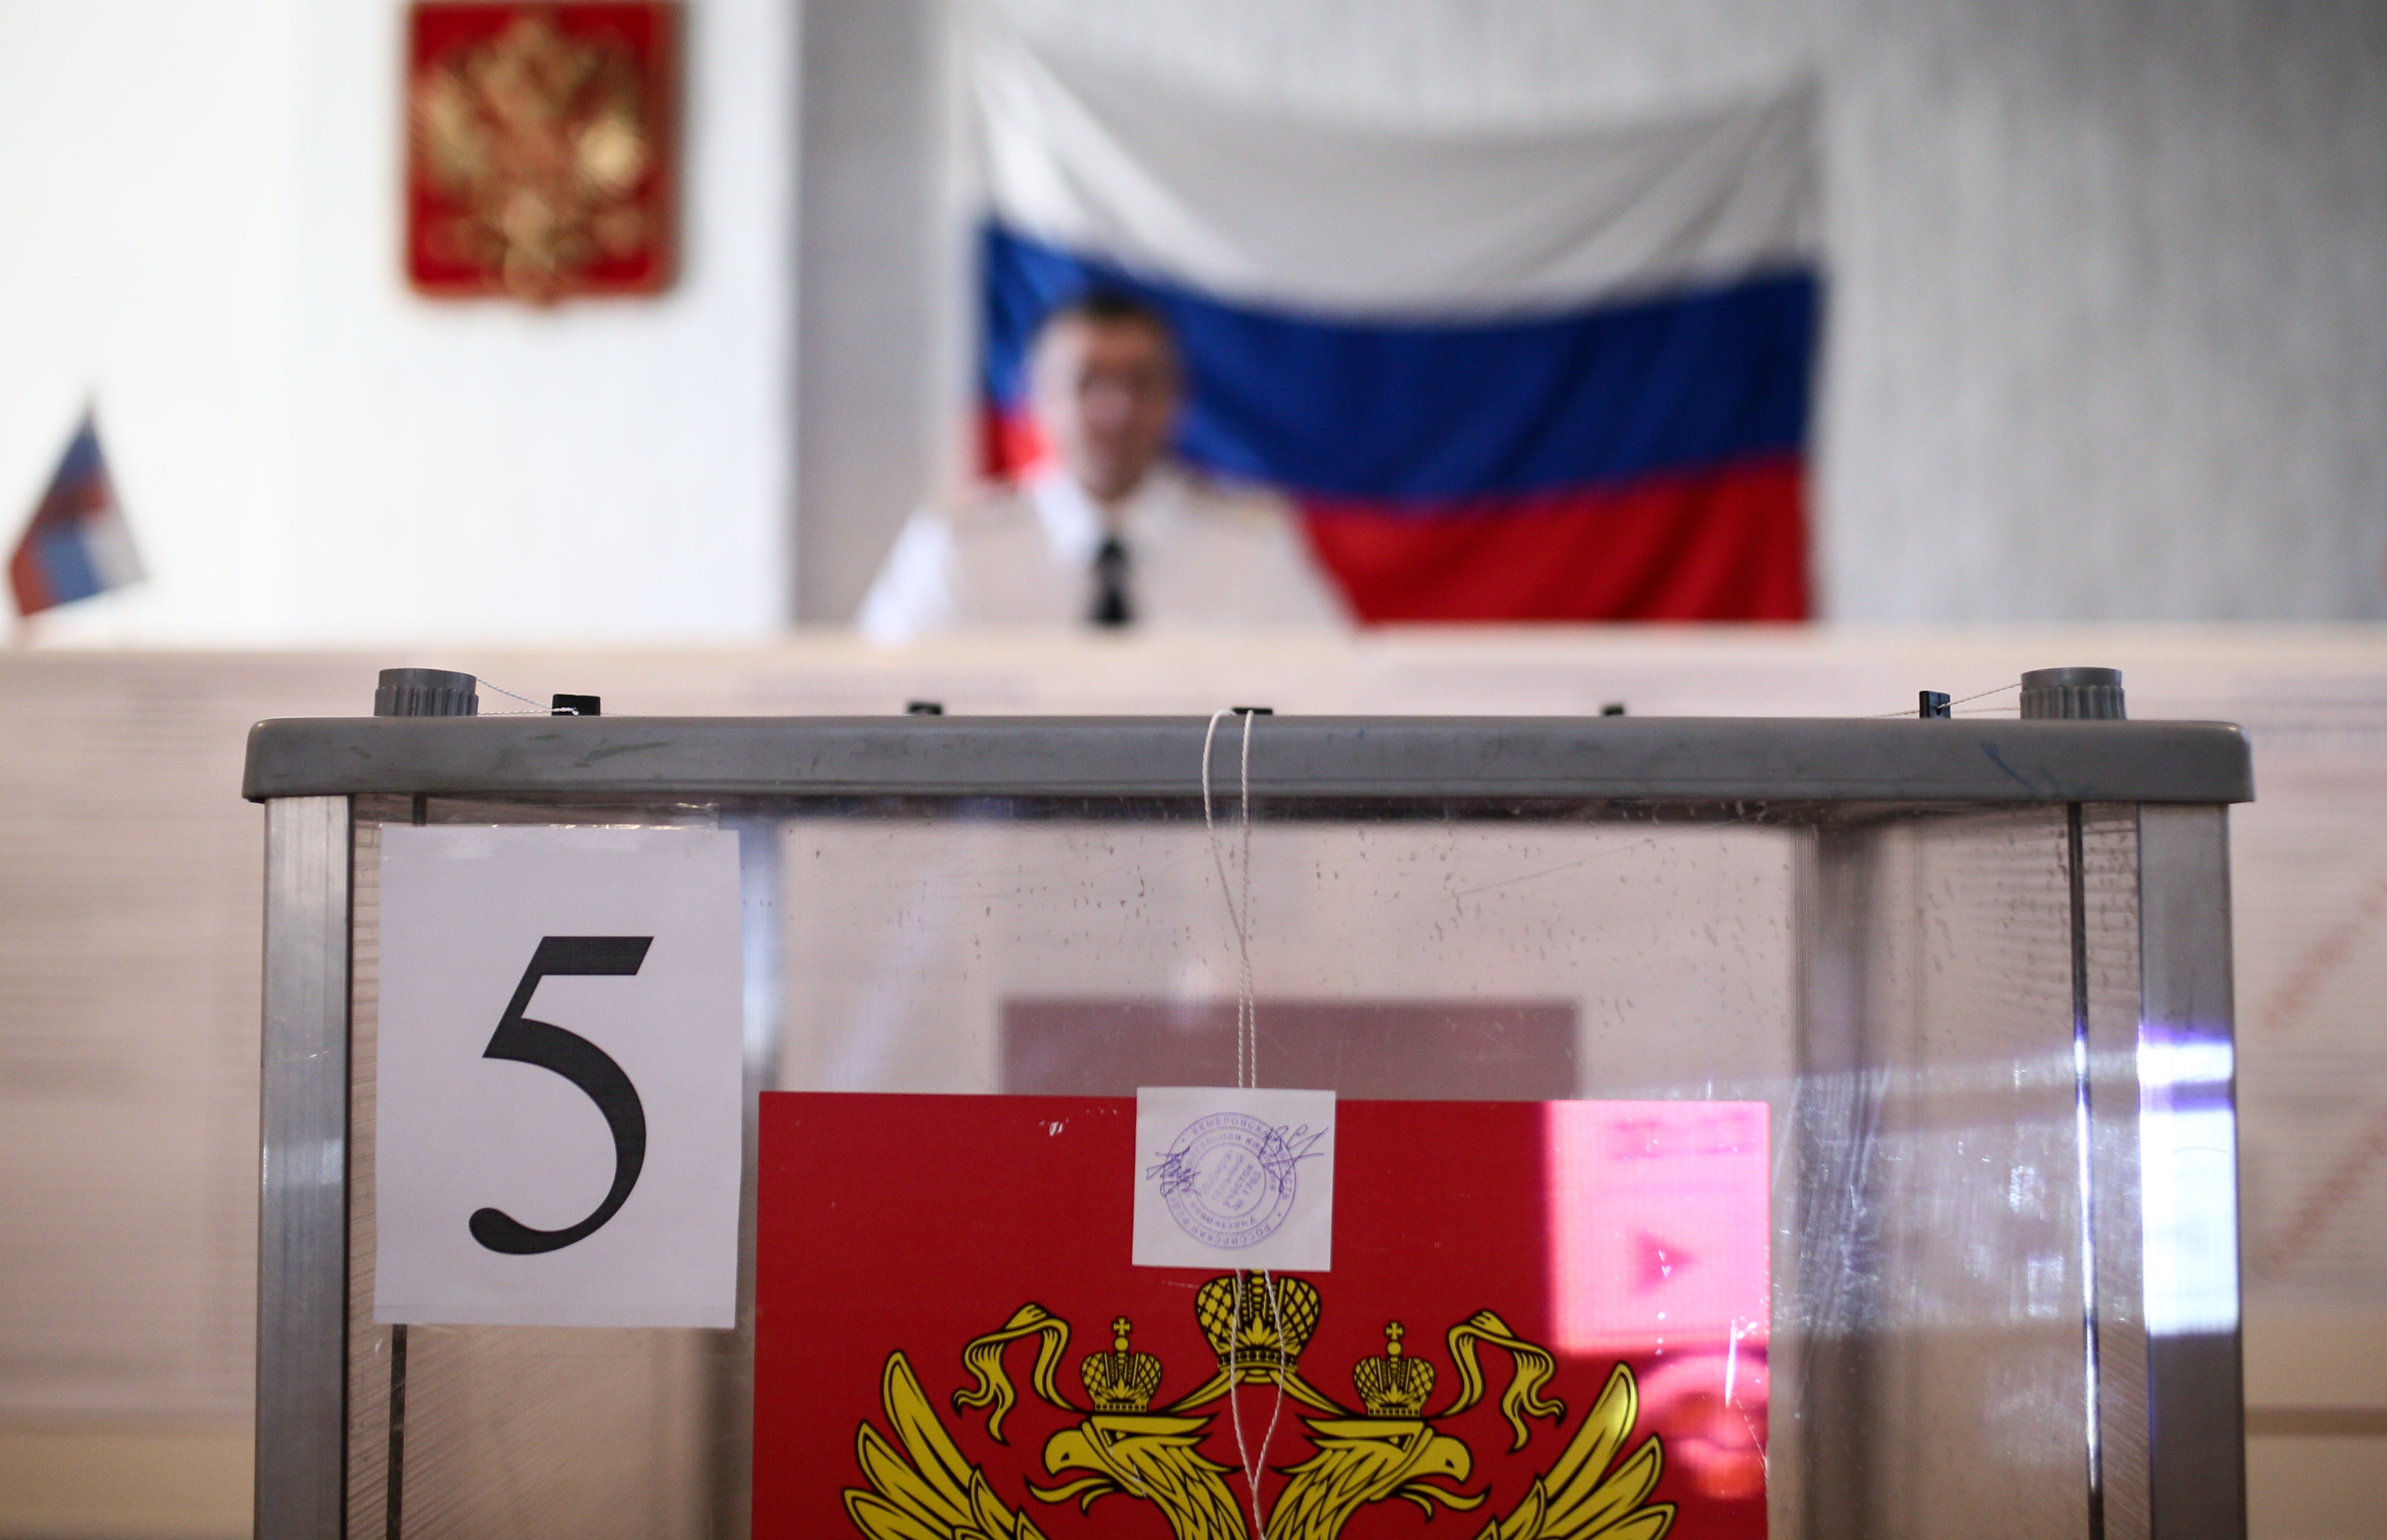 Few doubt the Kremlin will win a landslide at the Russian legislative election, but there may be some surprises